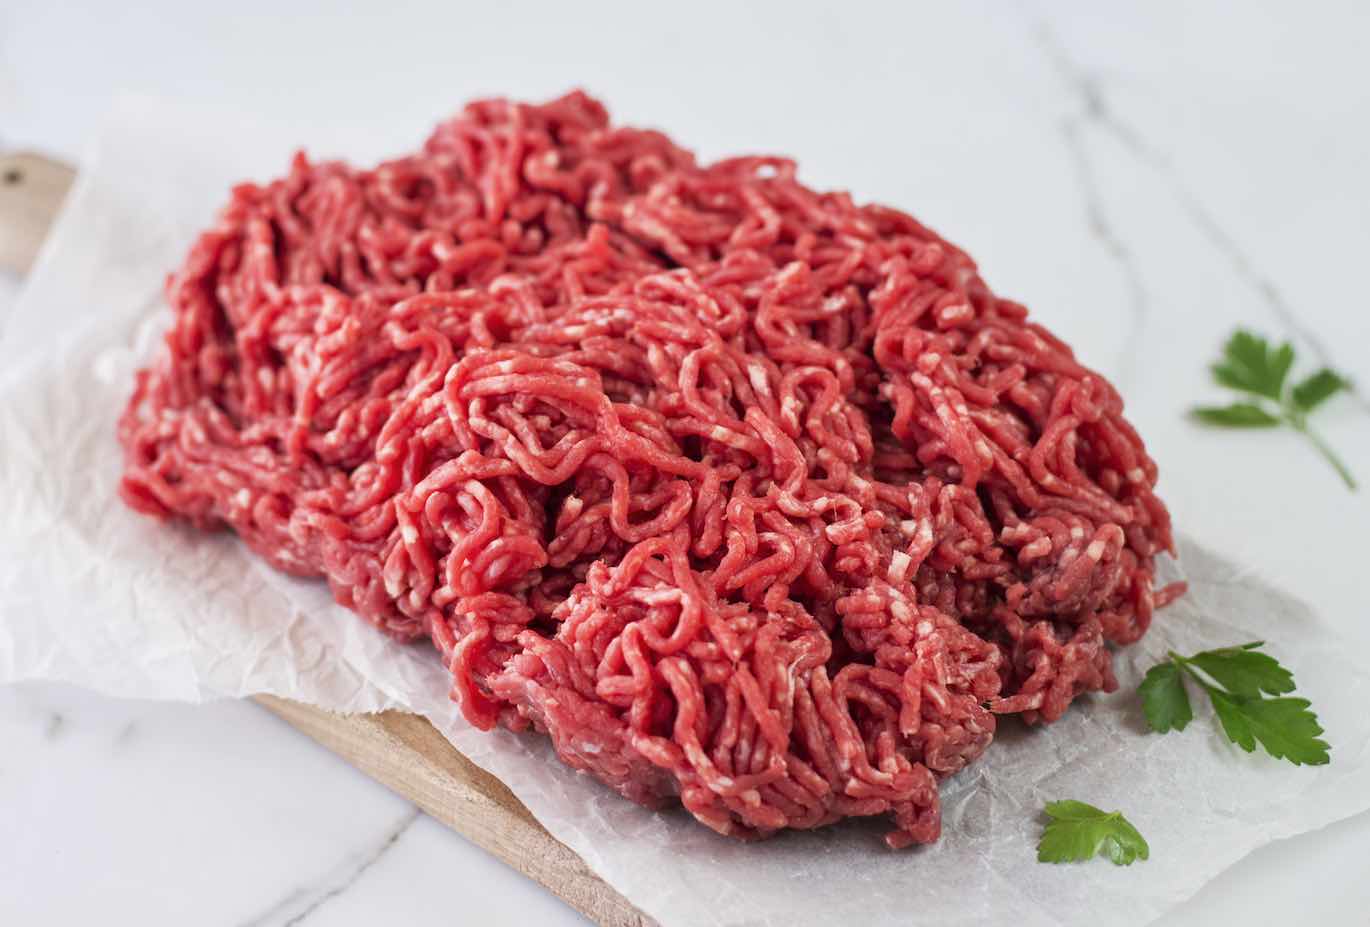 How To Store Uncooked Ground Beef